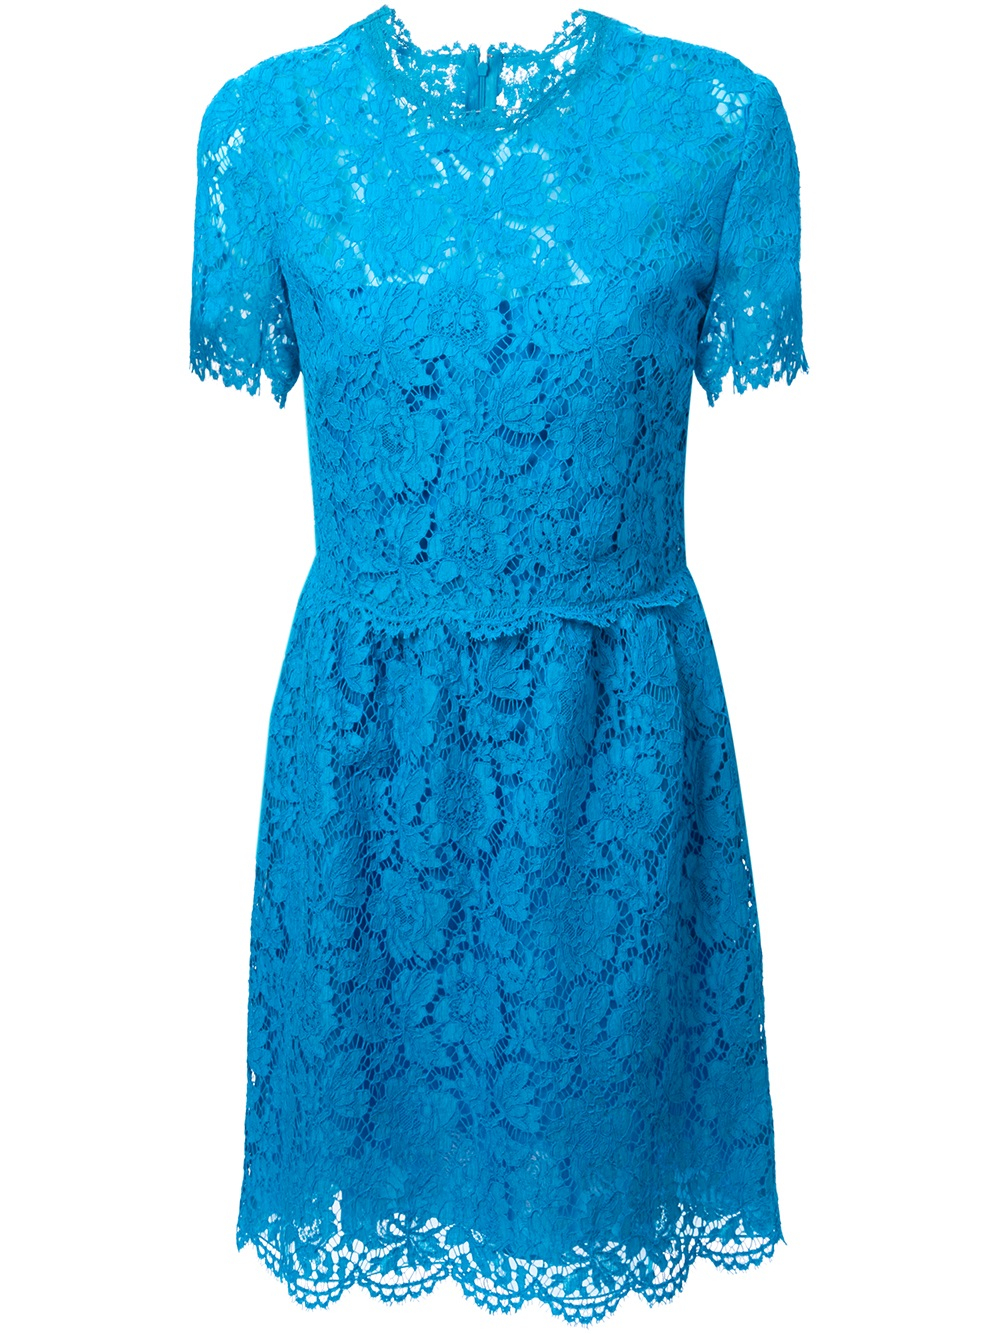 Valentino Floral Lace Dress in Blue | Lyst